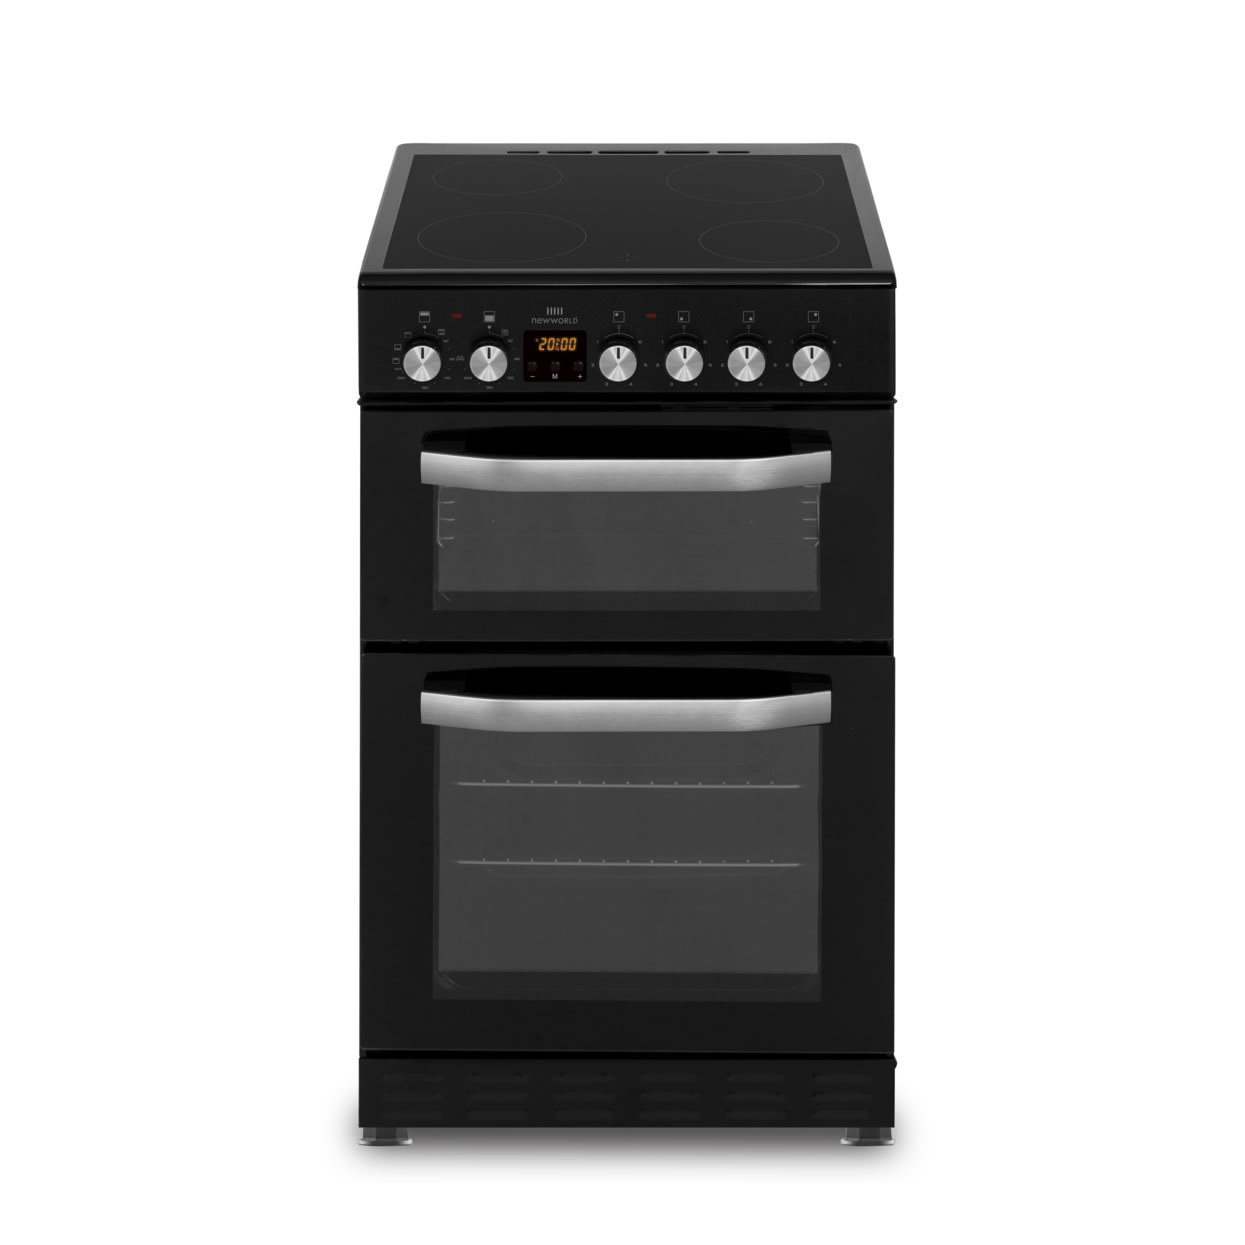 New-World 500mm Double Oven Electric Cooker Ceramic Hob Black